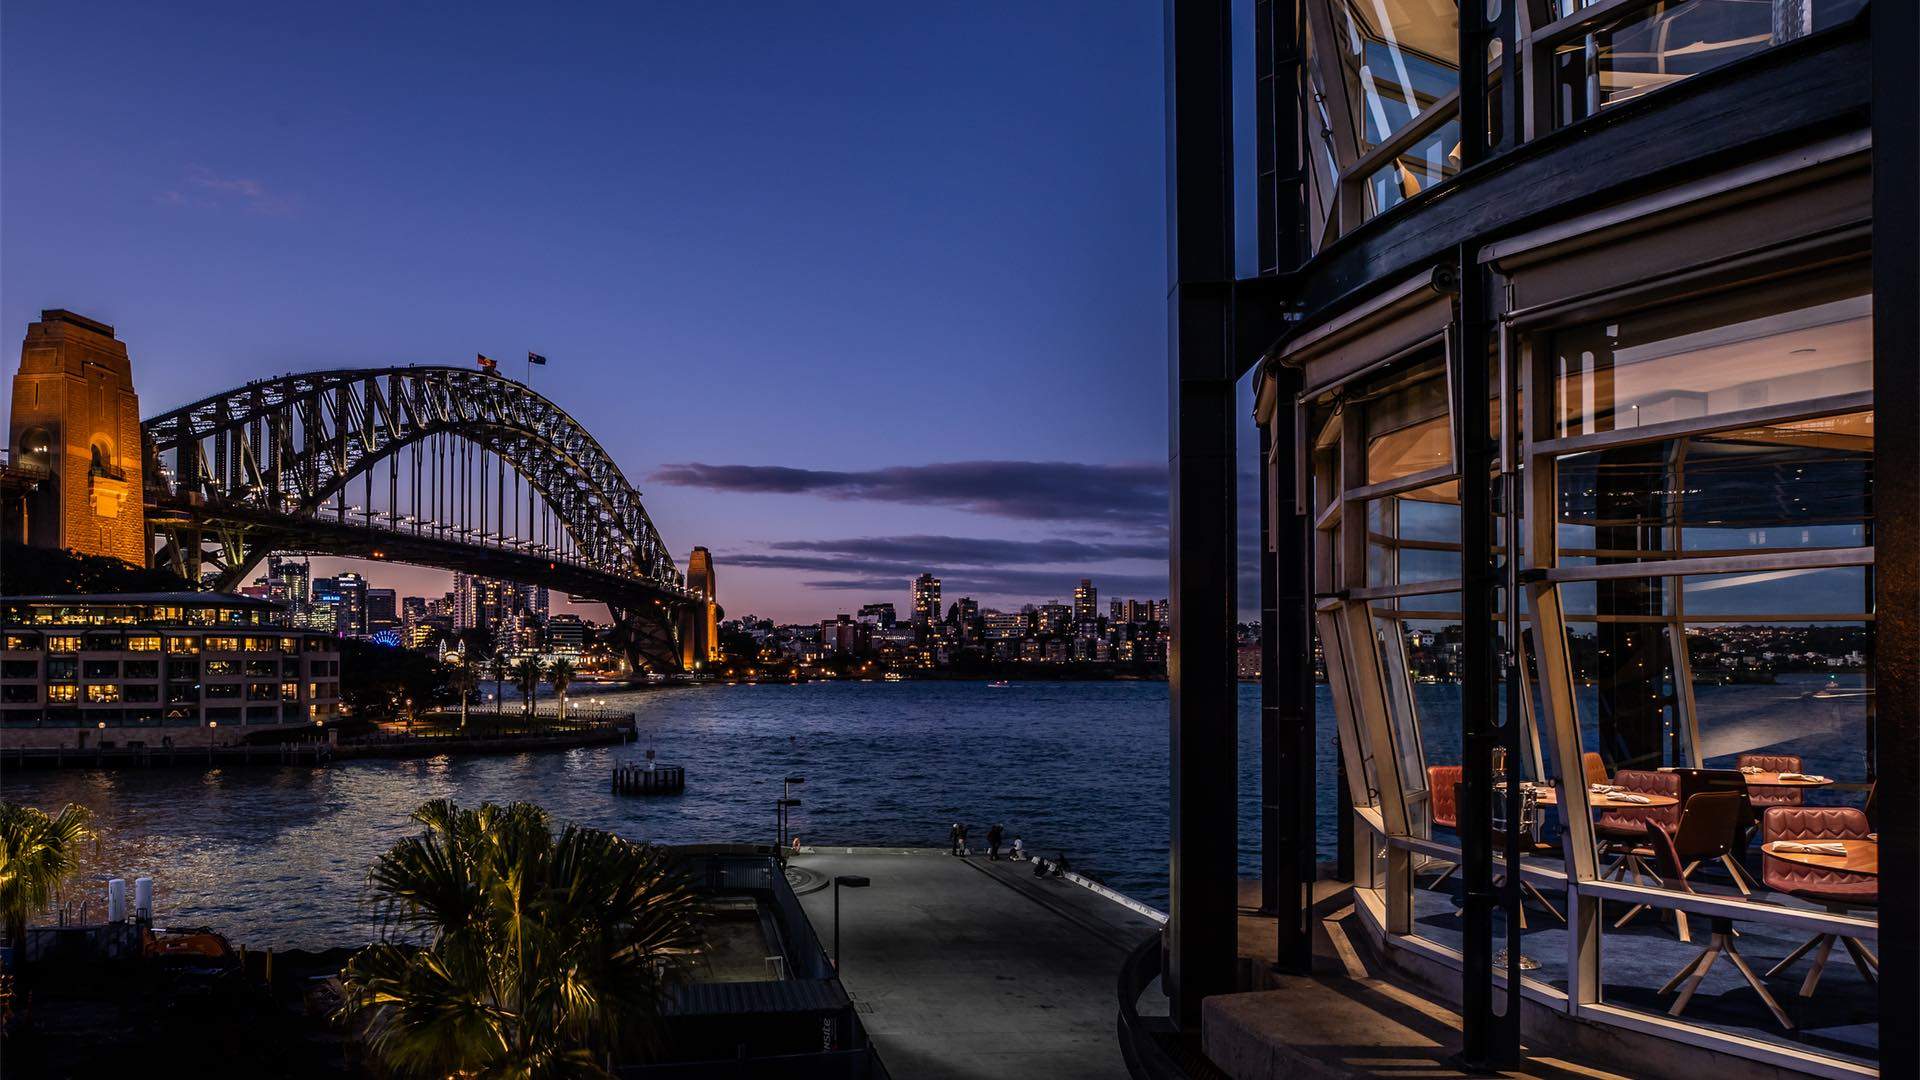 Views from Quay restaurant - home to one of the best private dining rooms in Sydney